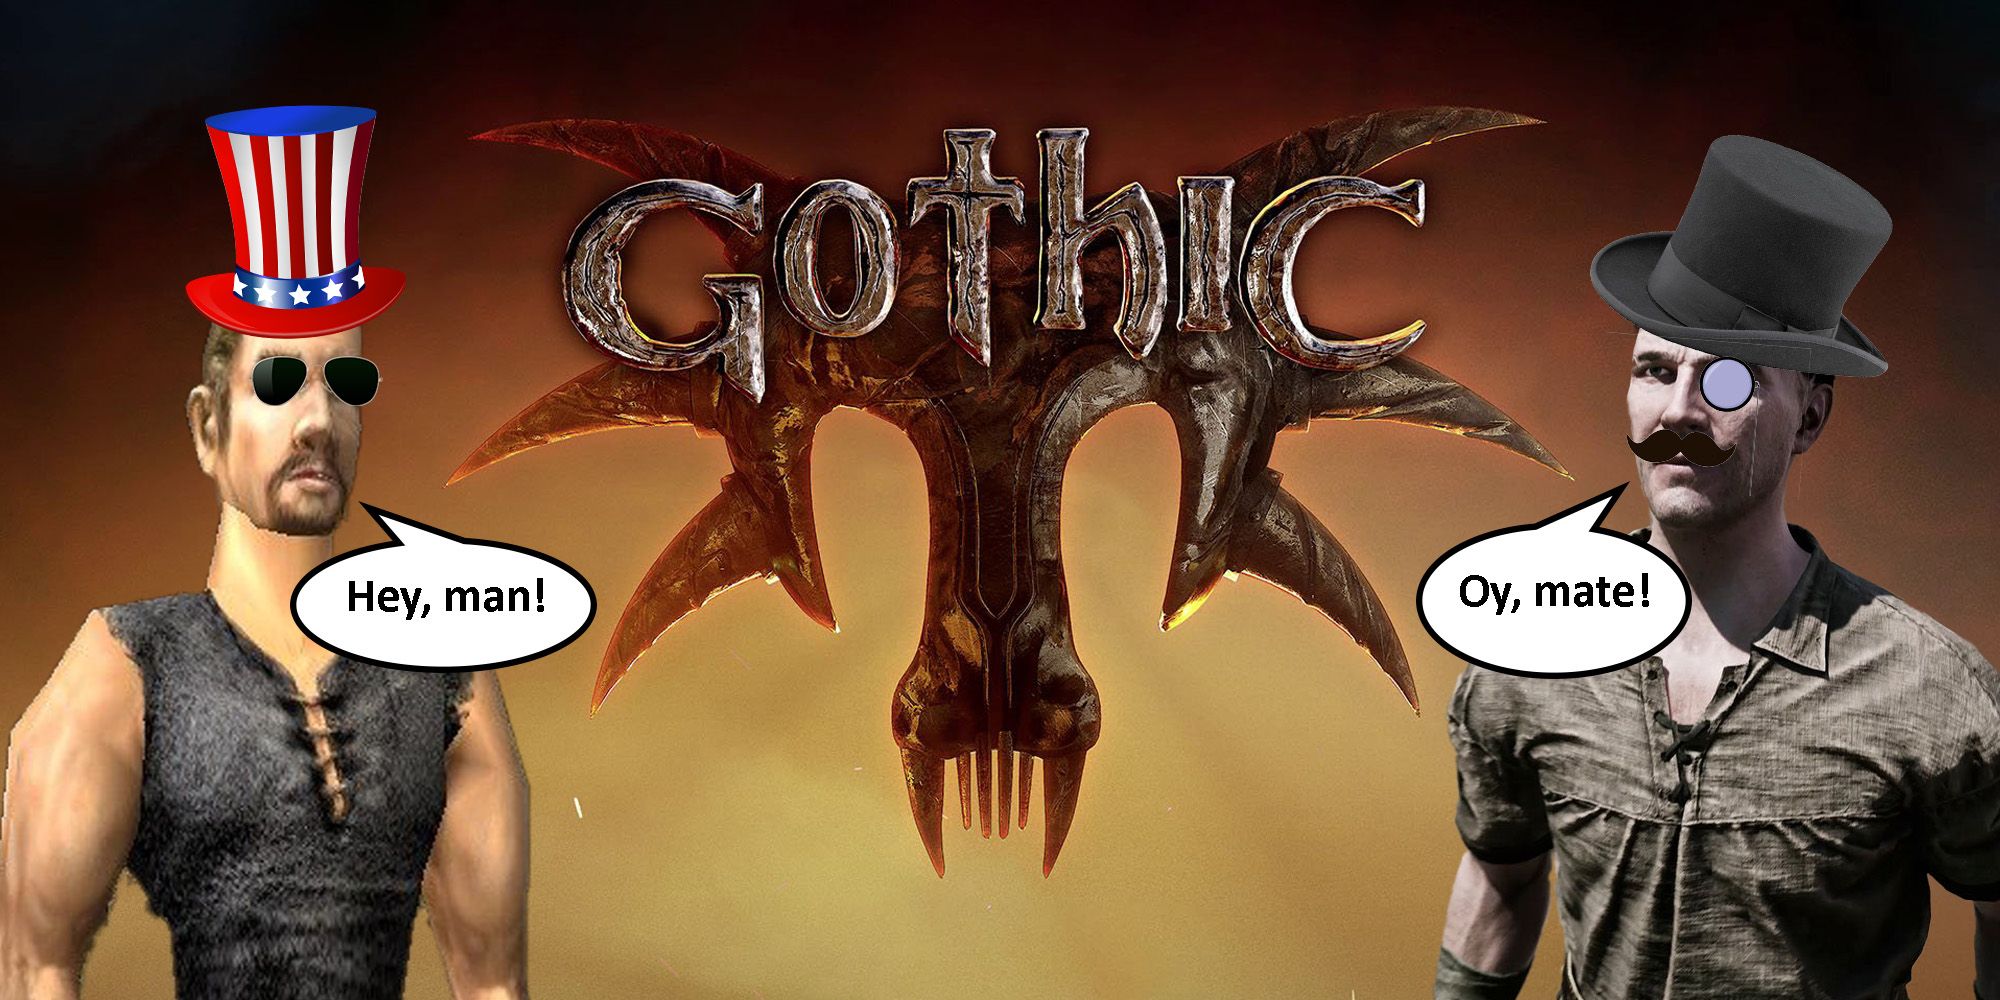 Gothic Remake trailer wrong accents